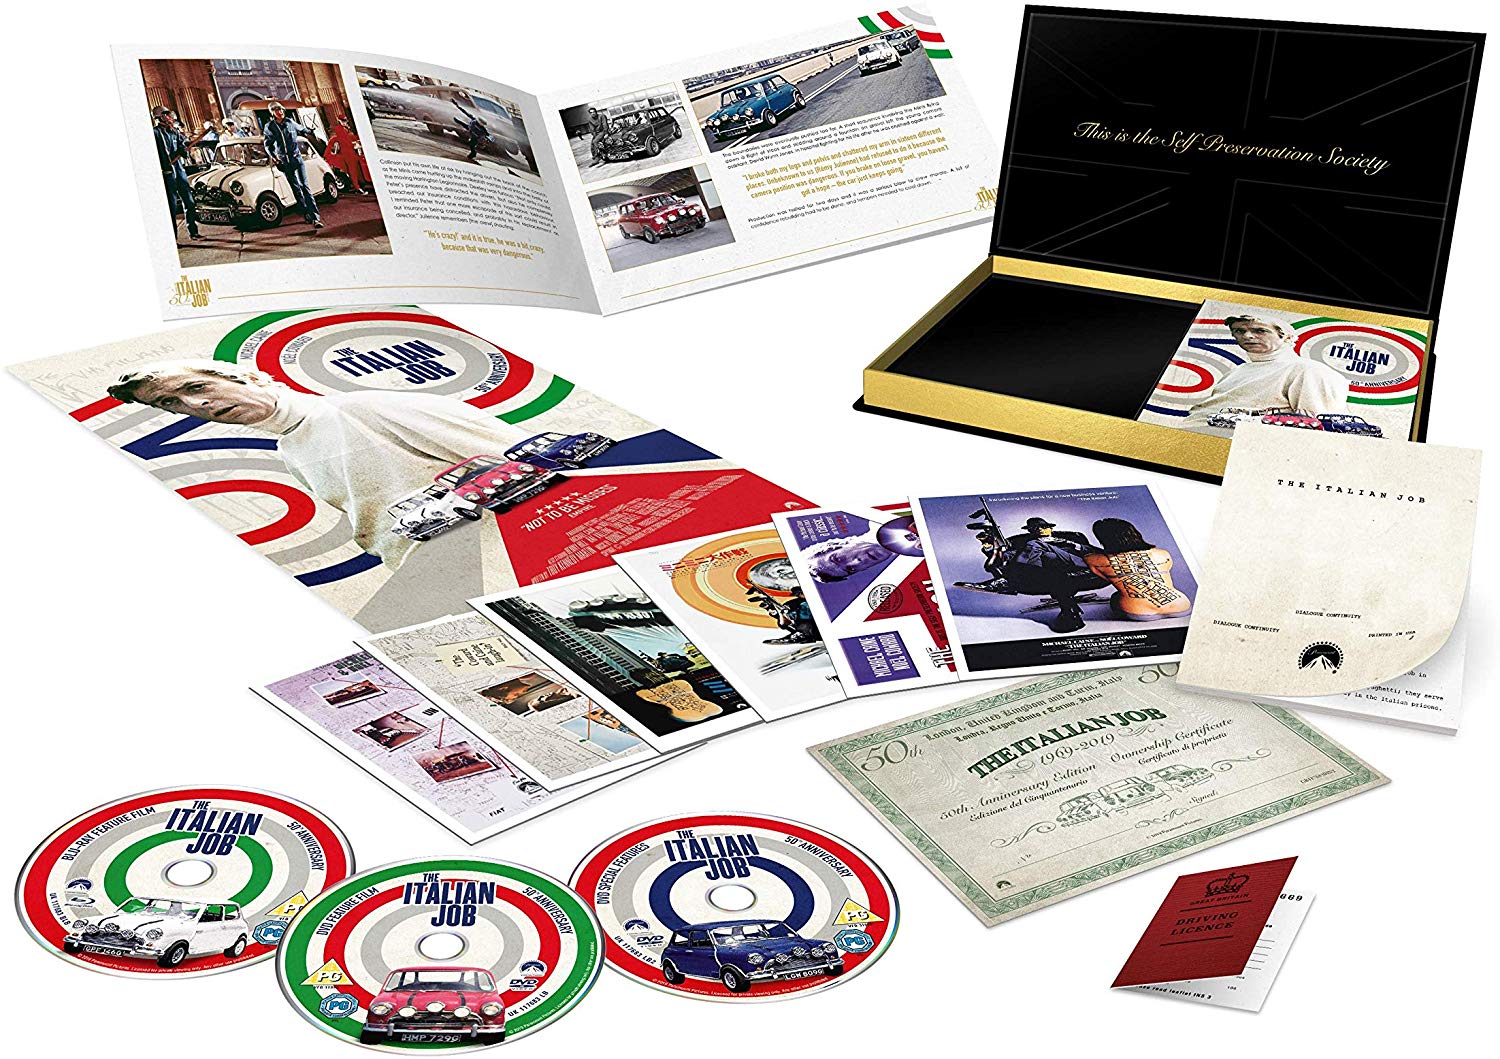 The Italian Job Th Anniversary Limited Edition DVD Blu Ray Driving Co Uk From The Sunday Times